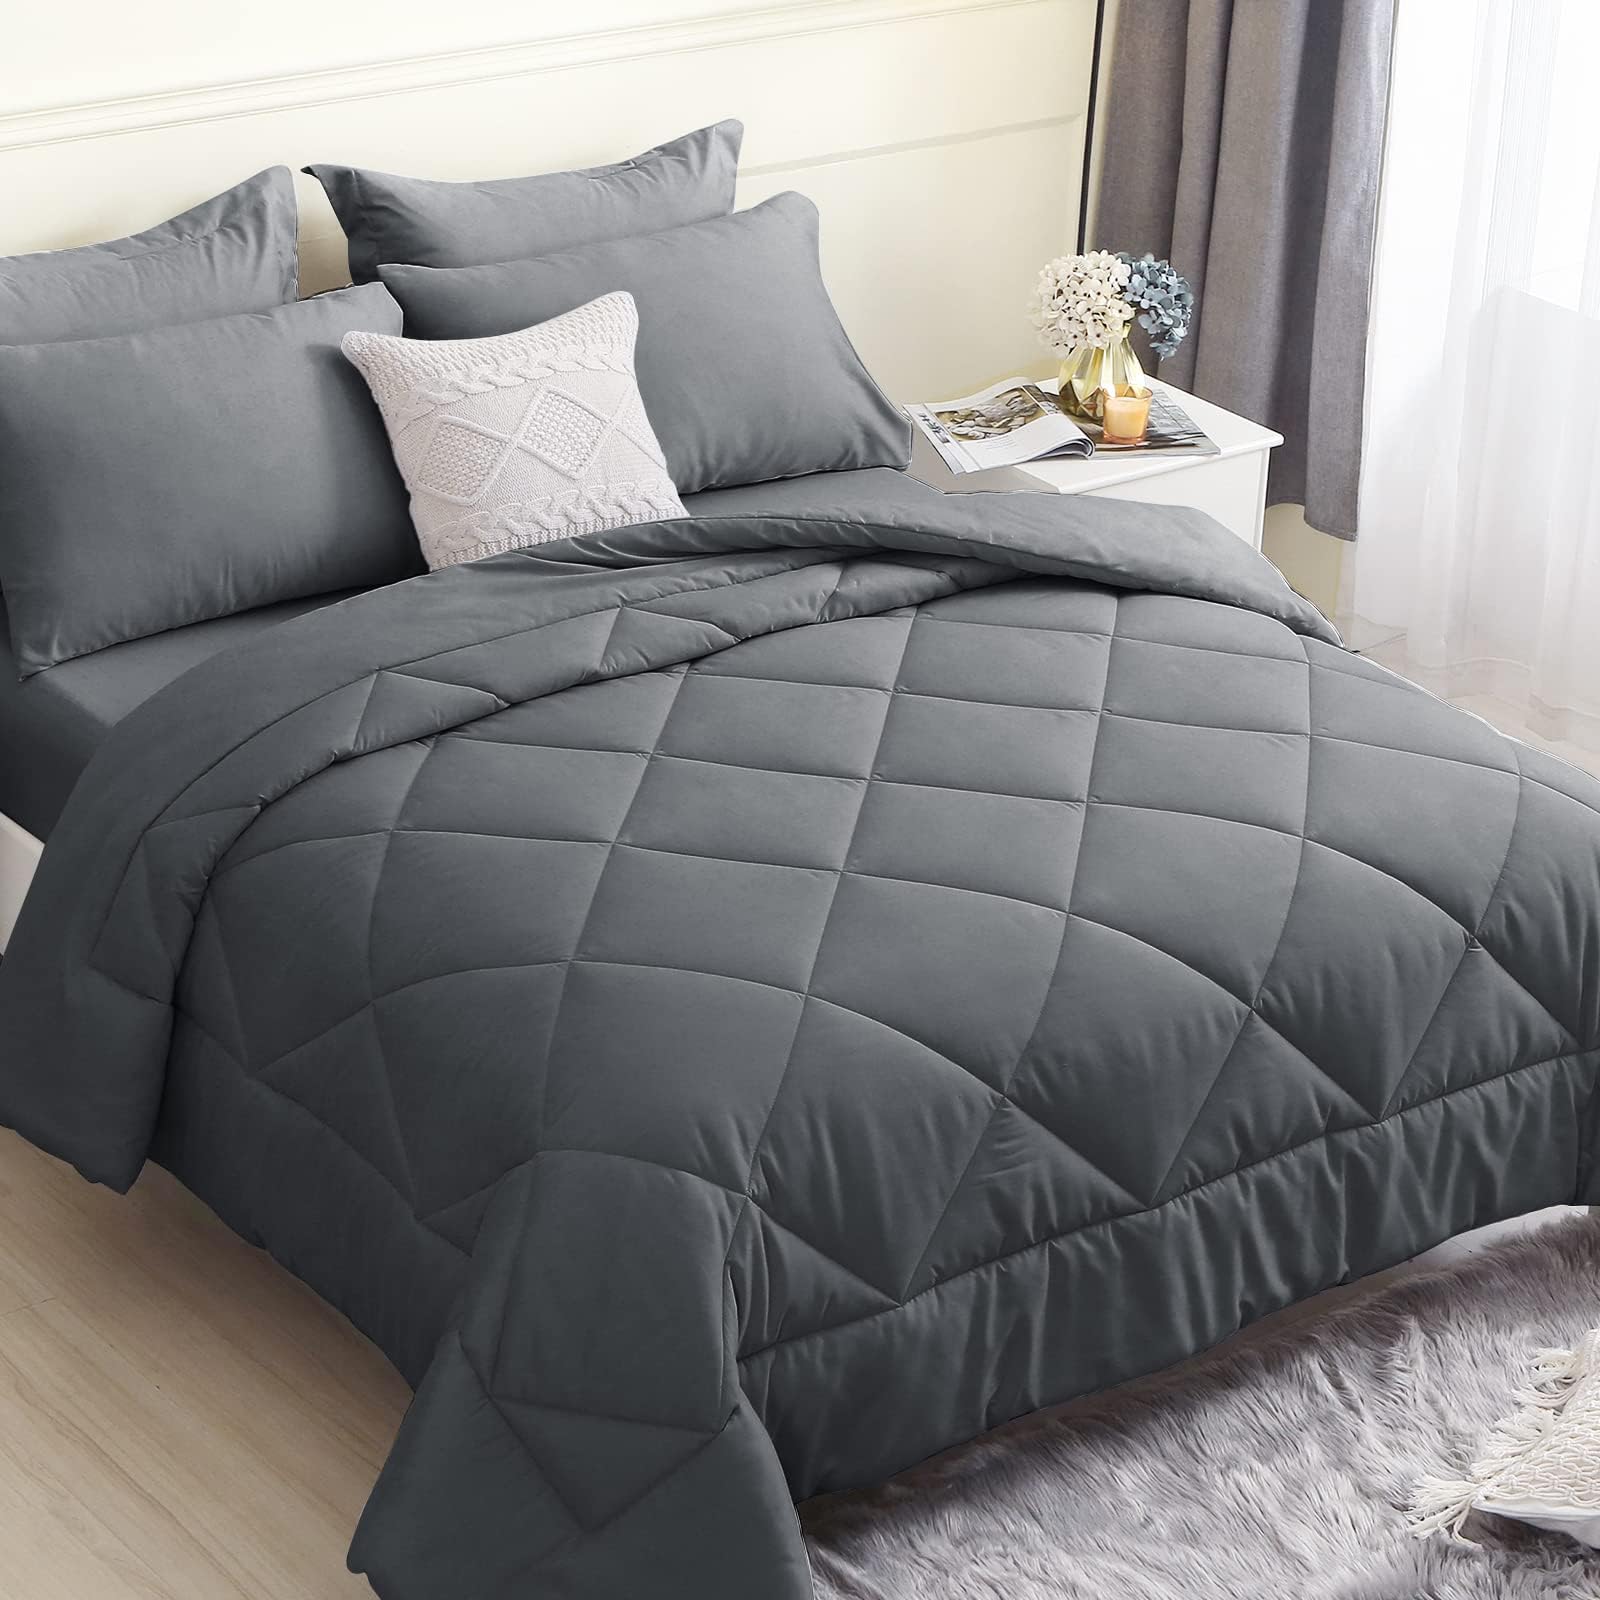 HEVUMYI Twin Comforter Set, 5 Pieces All Season Bed in a Bag Grey, Down Alternative Bedding Sets with Twin Comforter, Flat Sheet